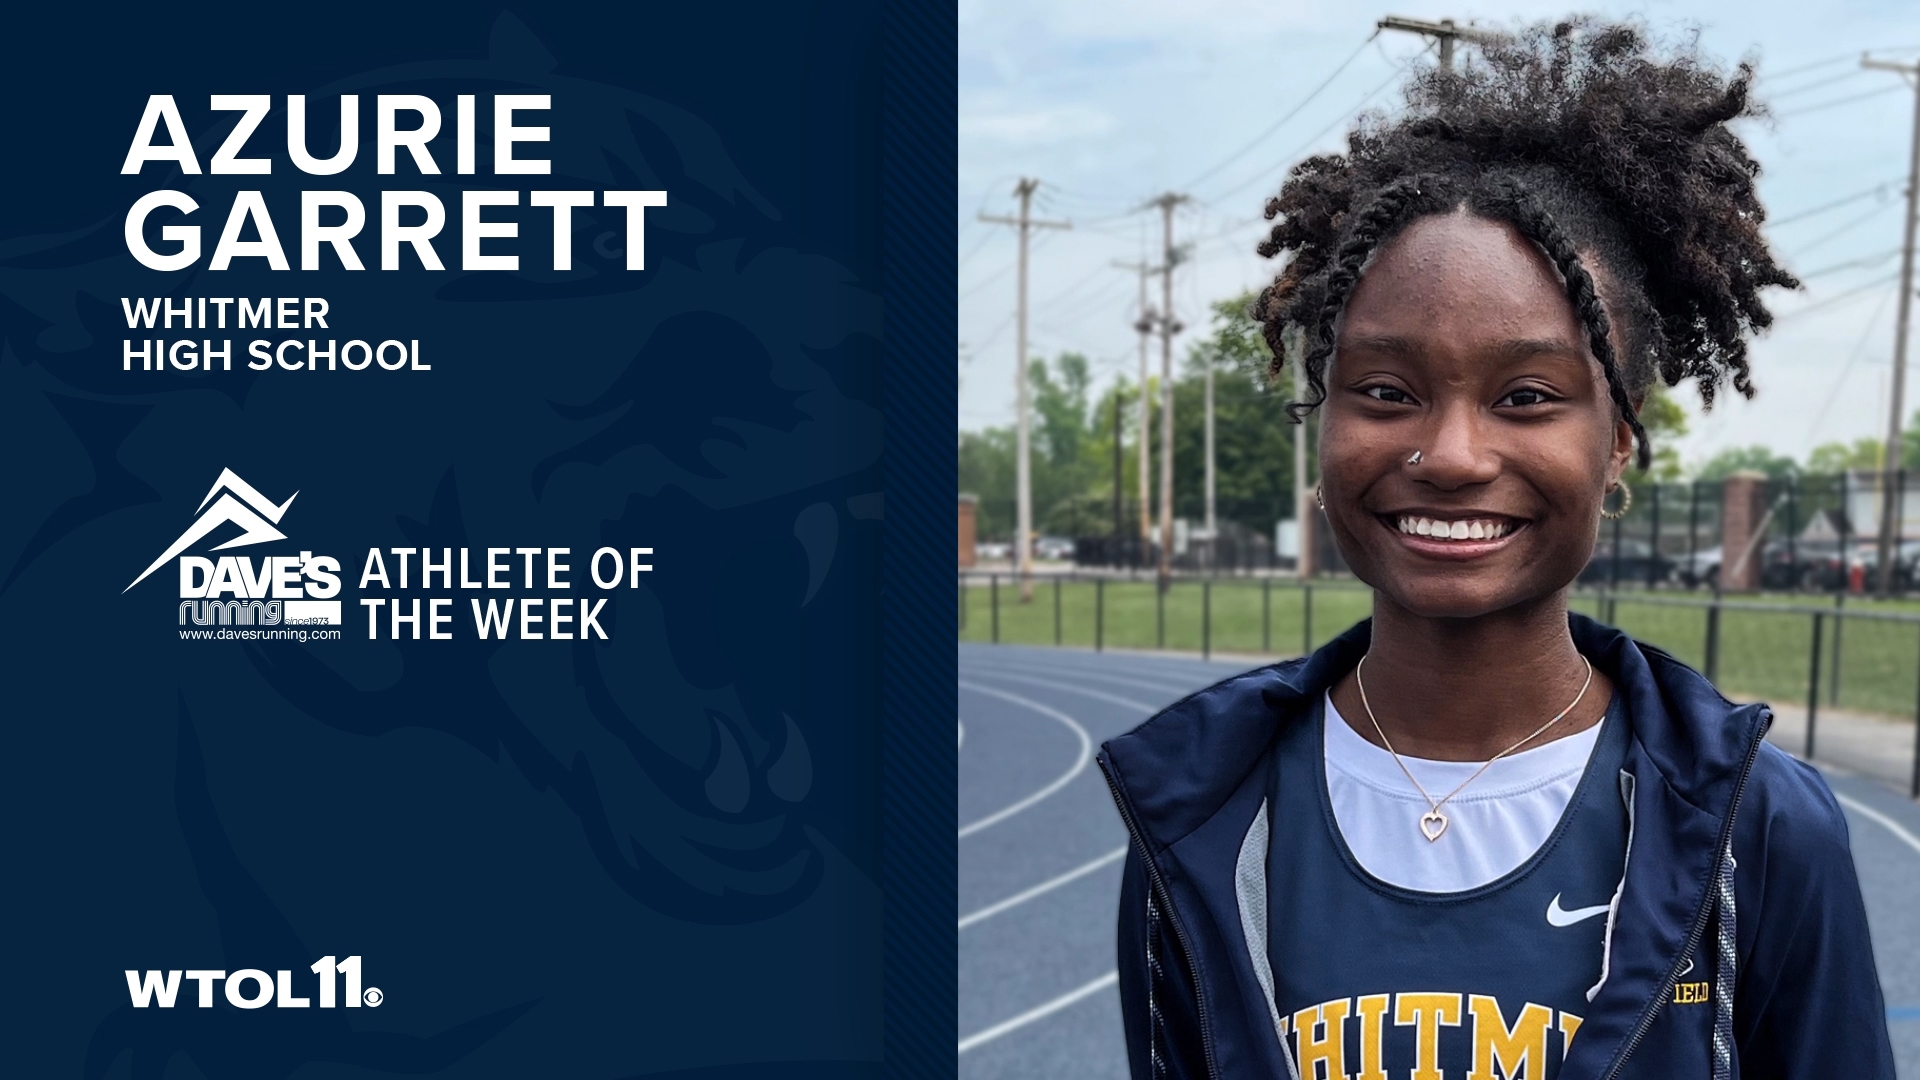 Azurie Garrett's athleticism has paved a path toward greatness, with the Whitmer Panthers capturing a league championship in the program's first year in the NLL.